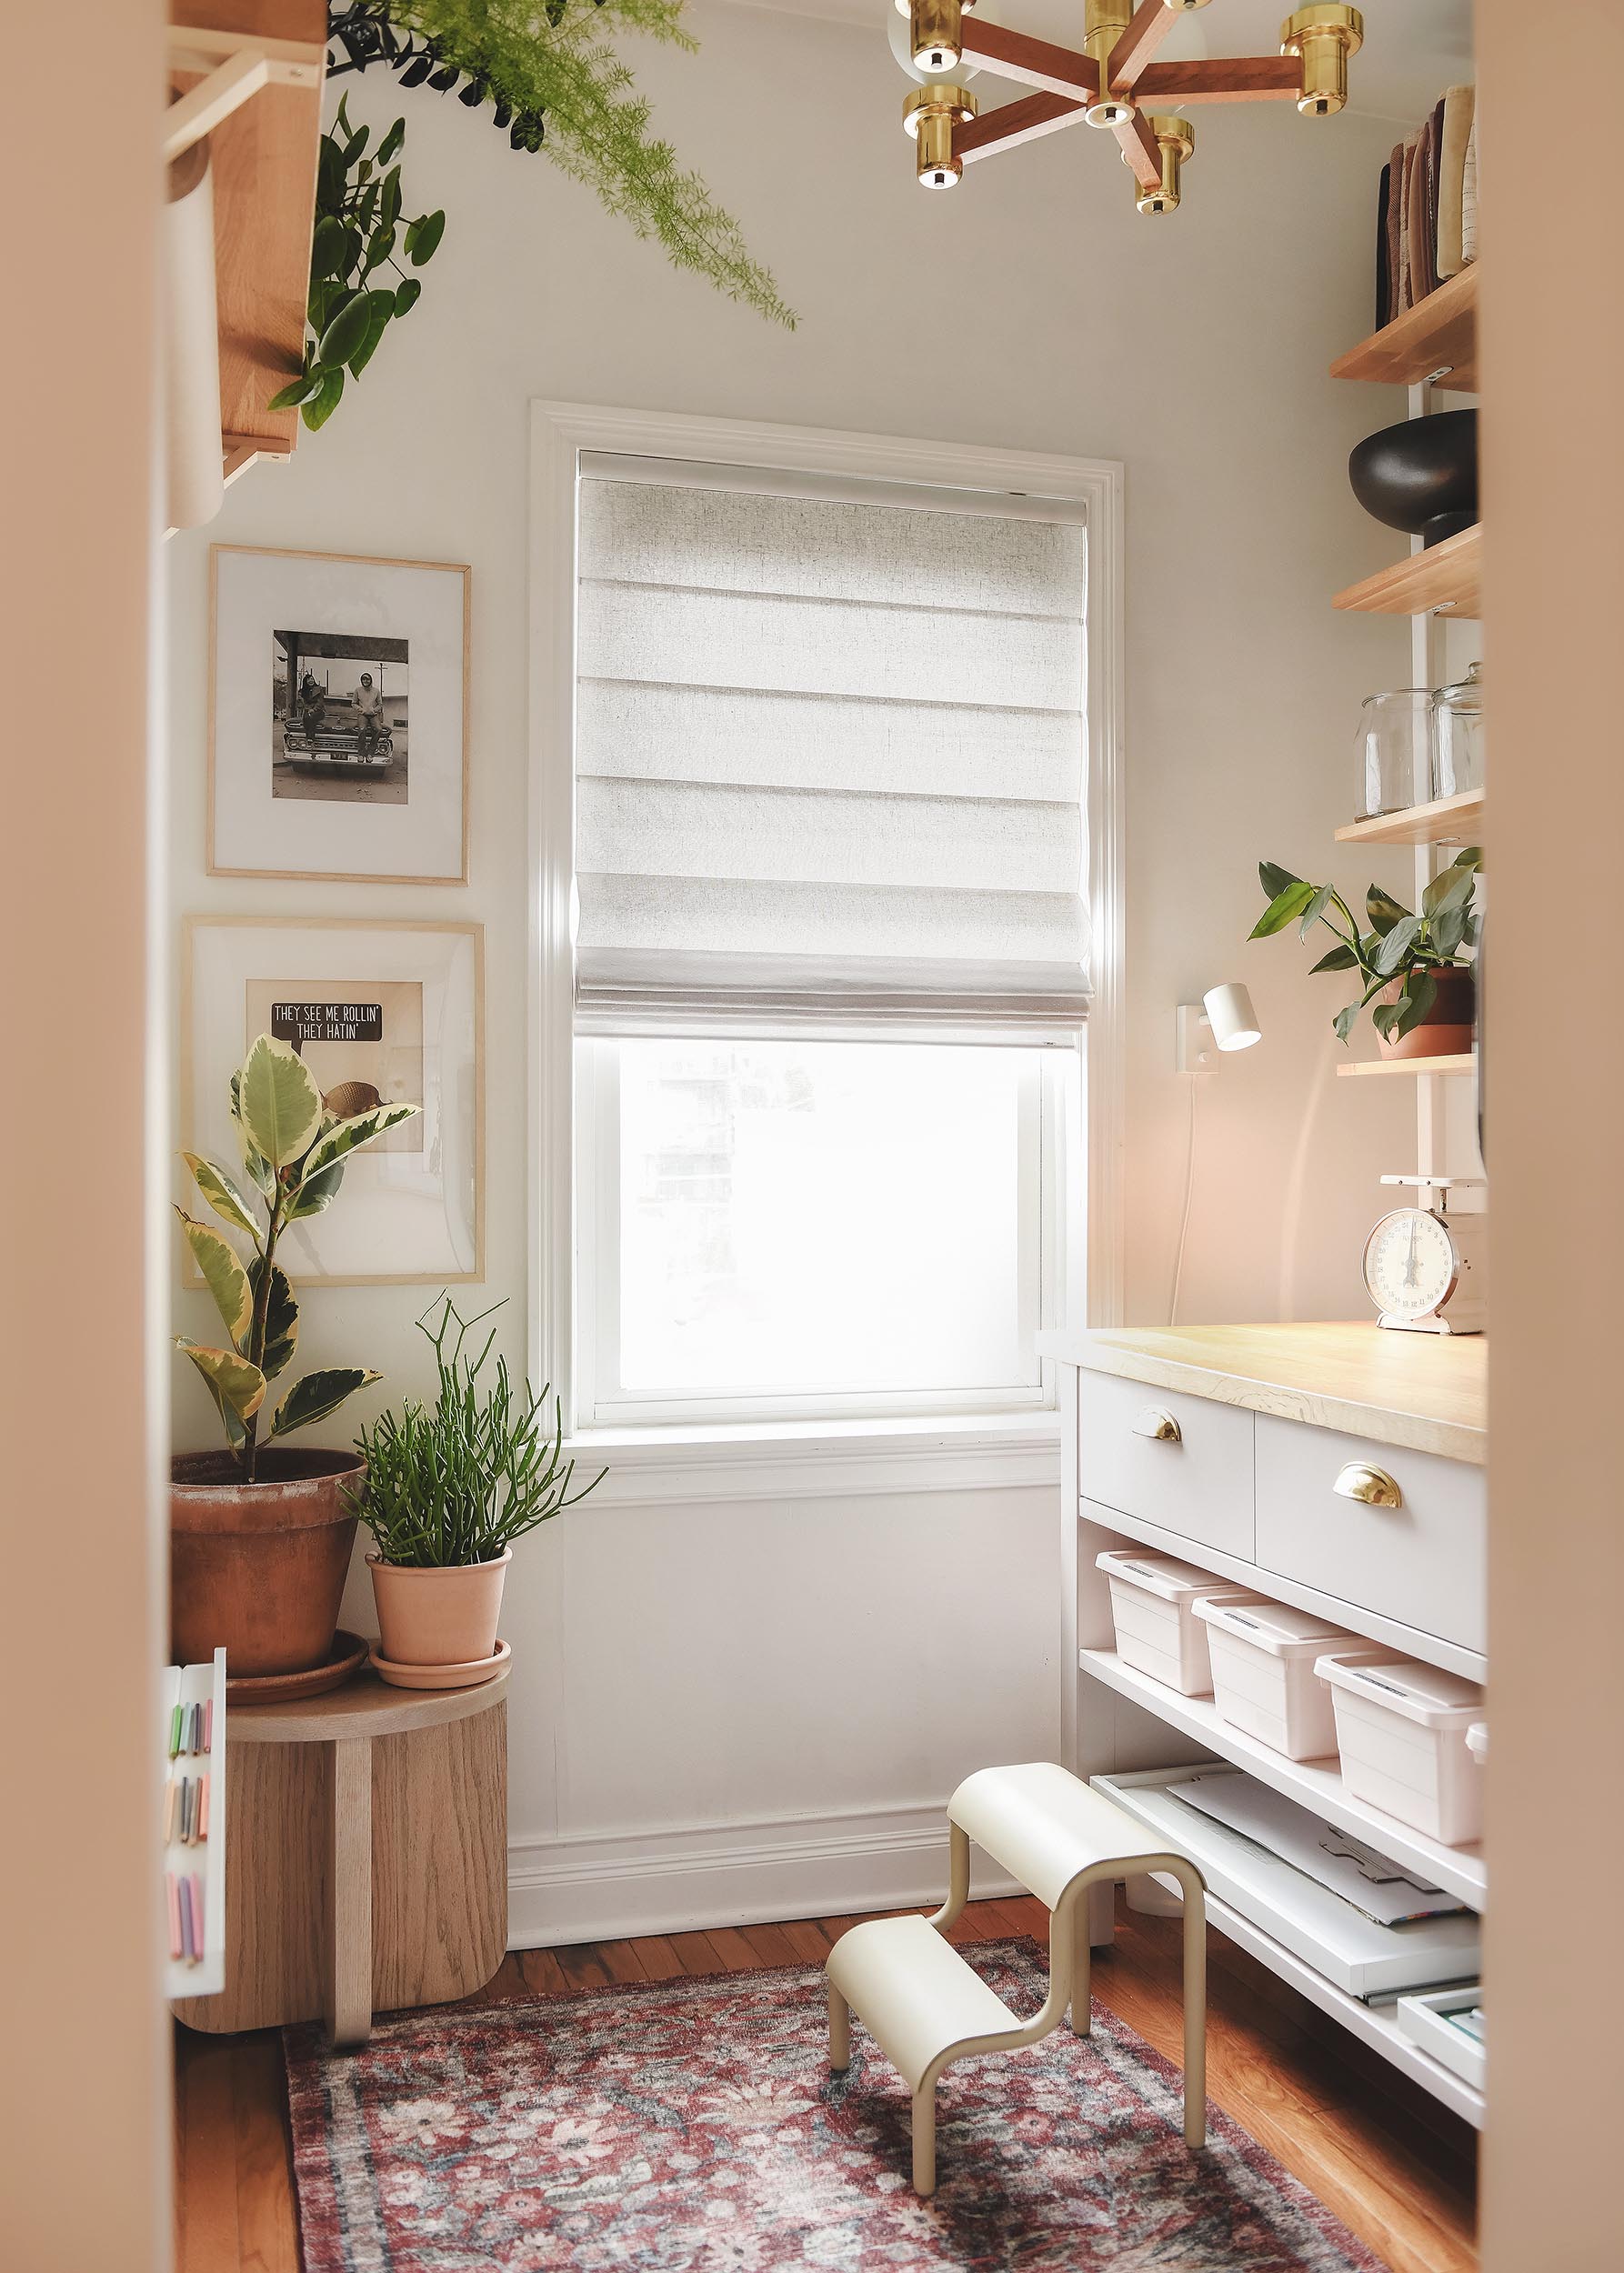 The almost sheer Classic Roman shades in our Chicago craft room offer privacy and light control // via Yellow Brick Home